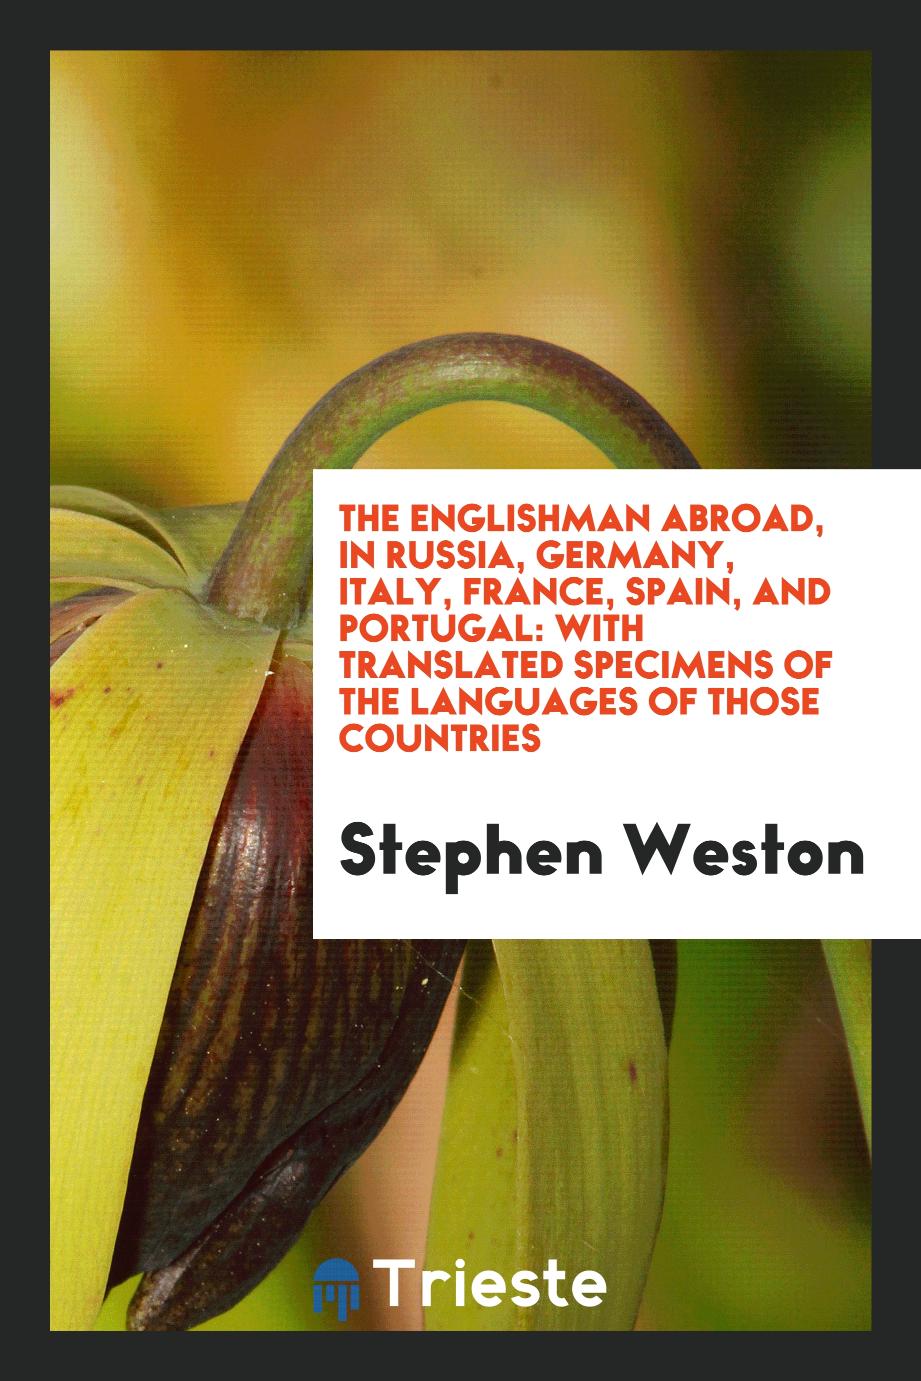 The Englishman Abroad, in Russia, Germany, Italy, France, Spain, and Portugal: With Translated Specimens of the Languages of Those Countries